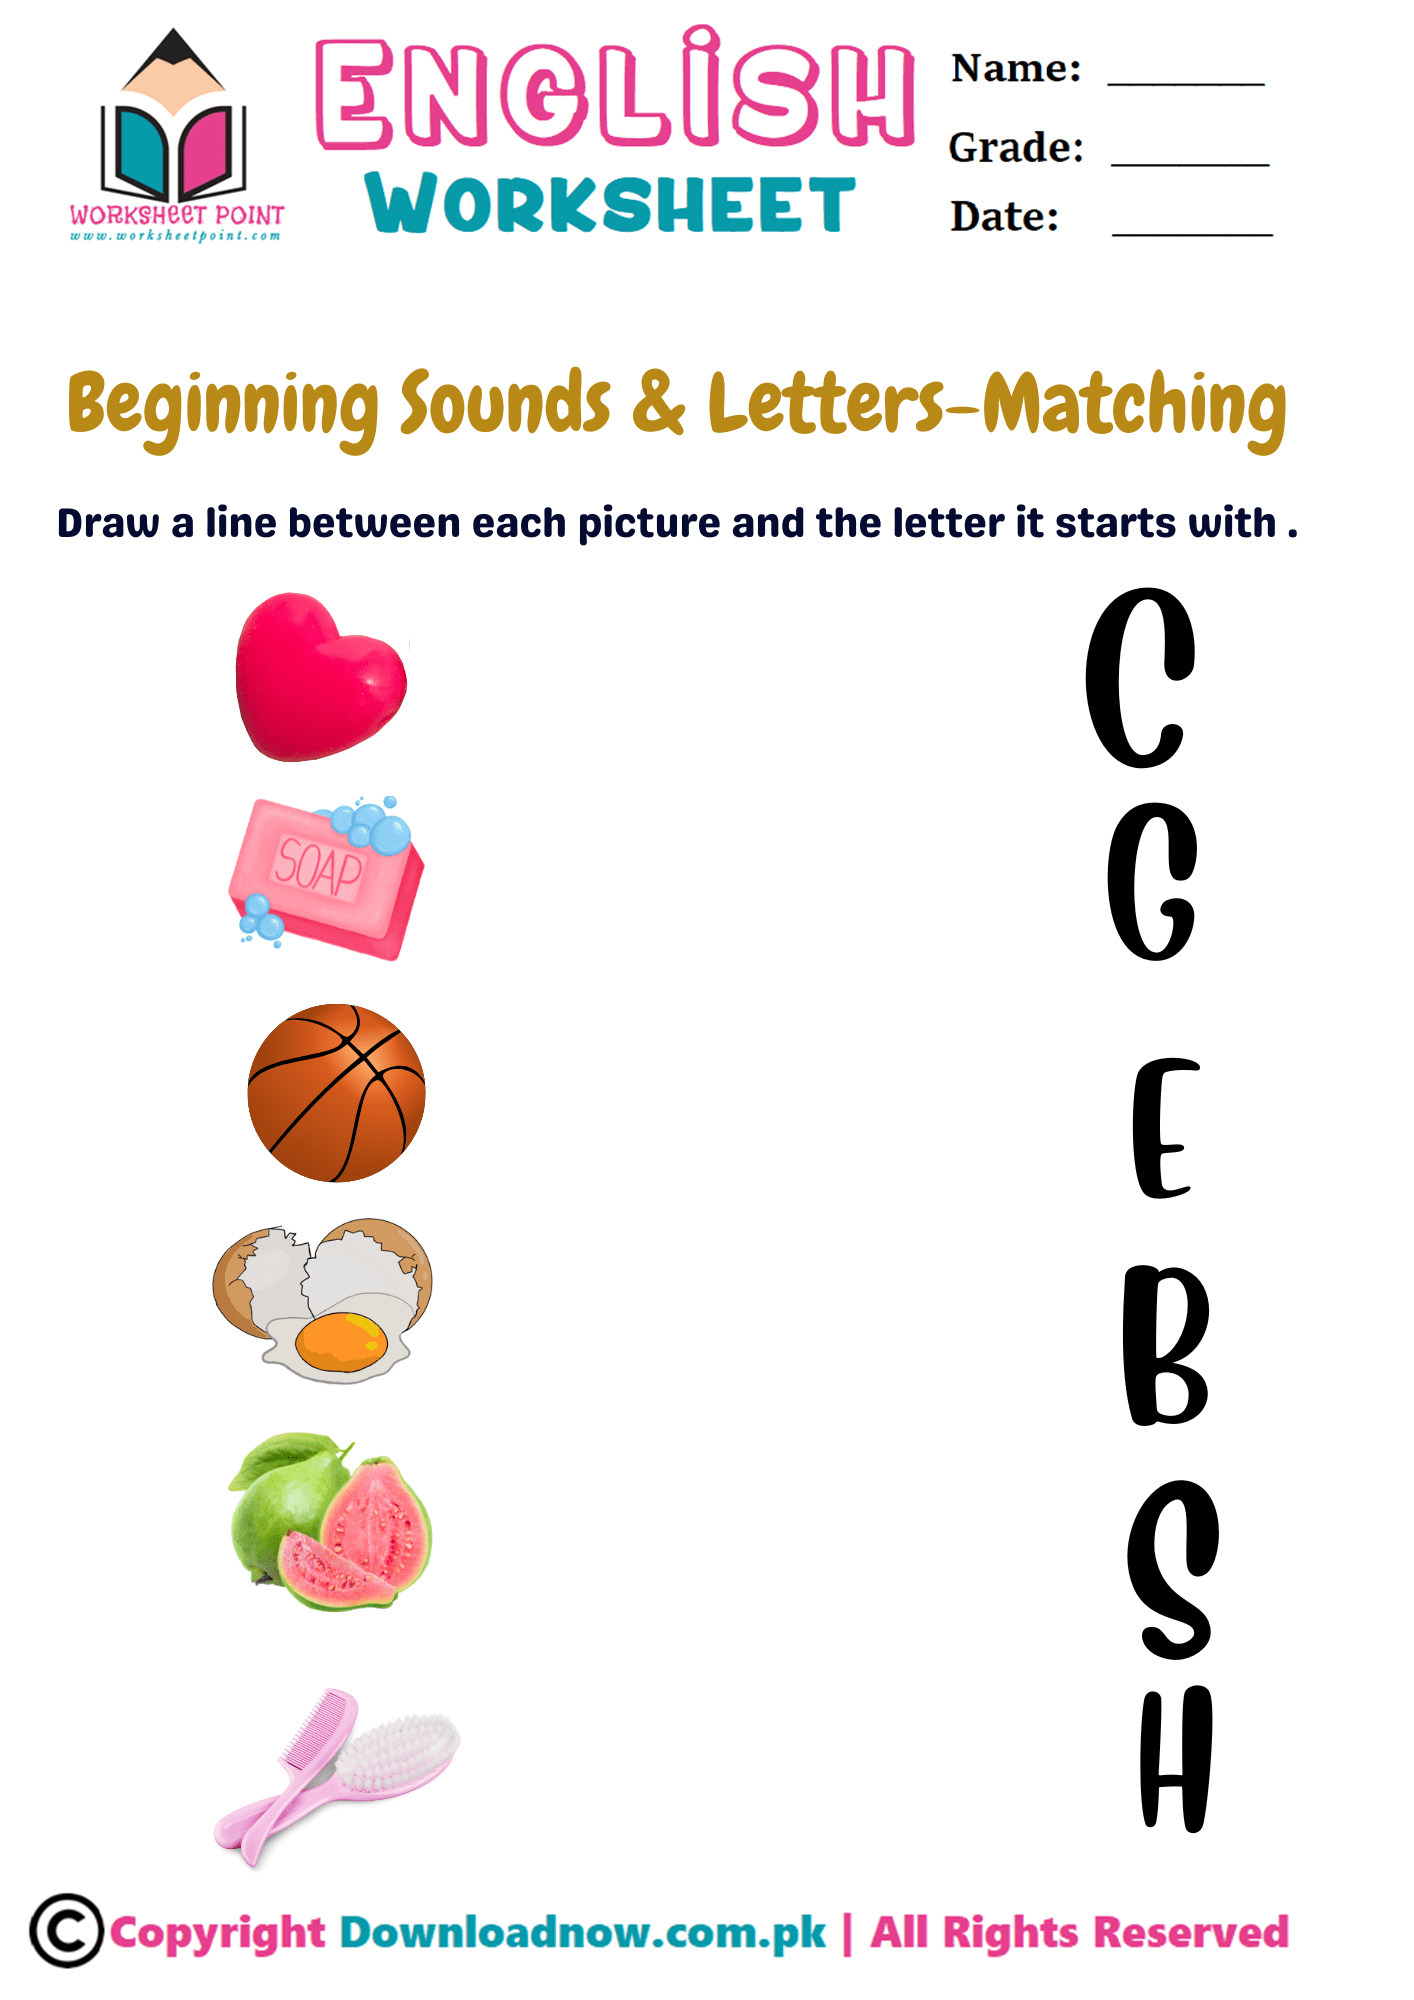 Rich Results on Google's SERP when searching for 'beginning sounds and letters matching (c)'